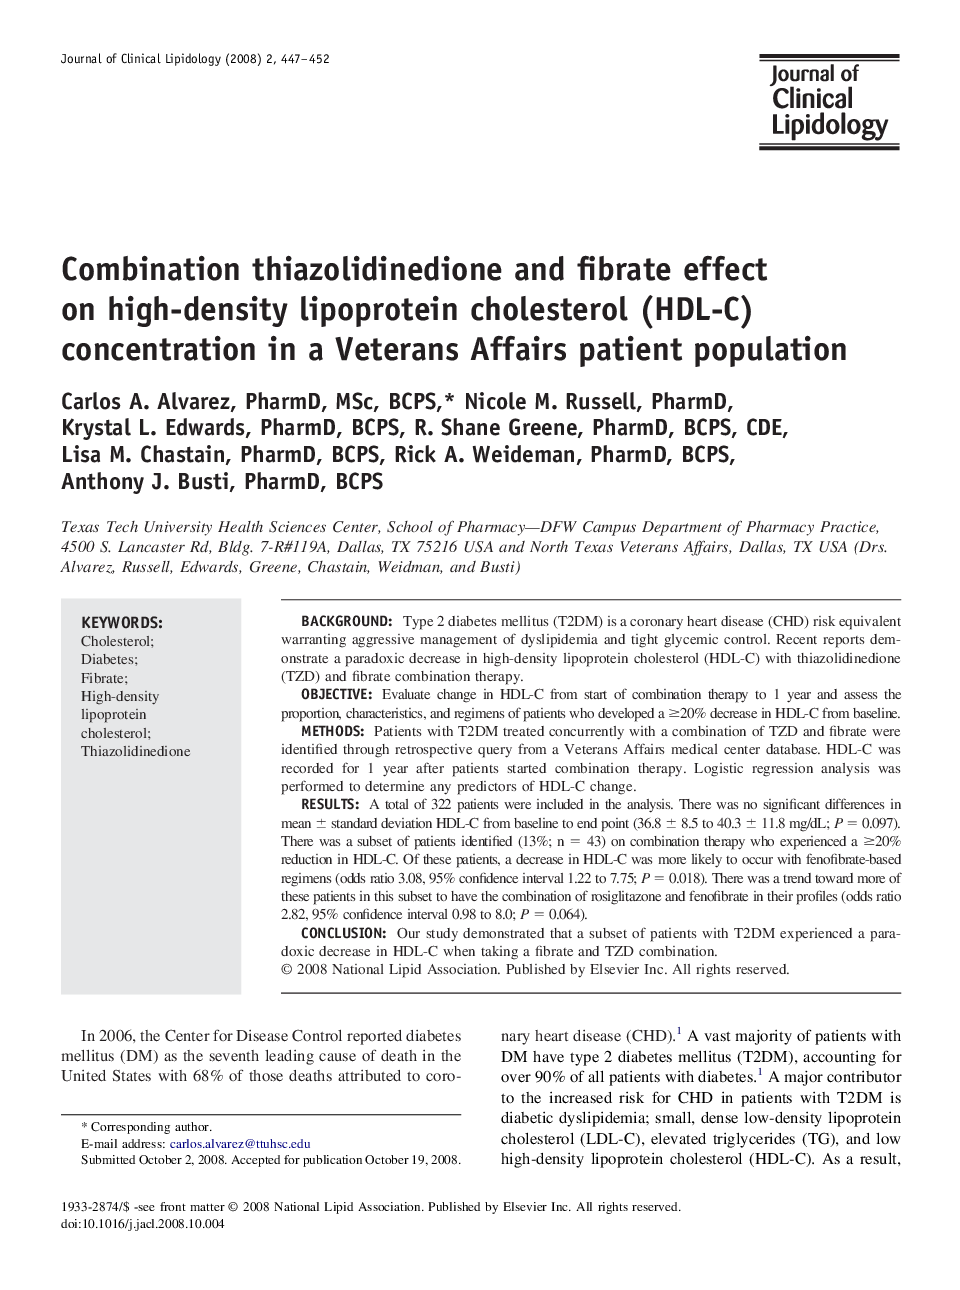 Combination thiazolidinedione and fibrate effect on high-density lipoprotein cholesterol (HDL-C) concentration in a Veterans Affairs patient population